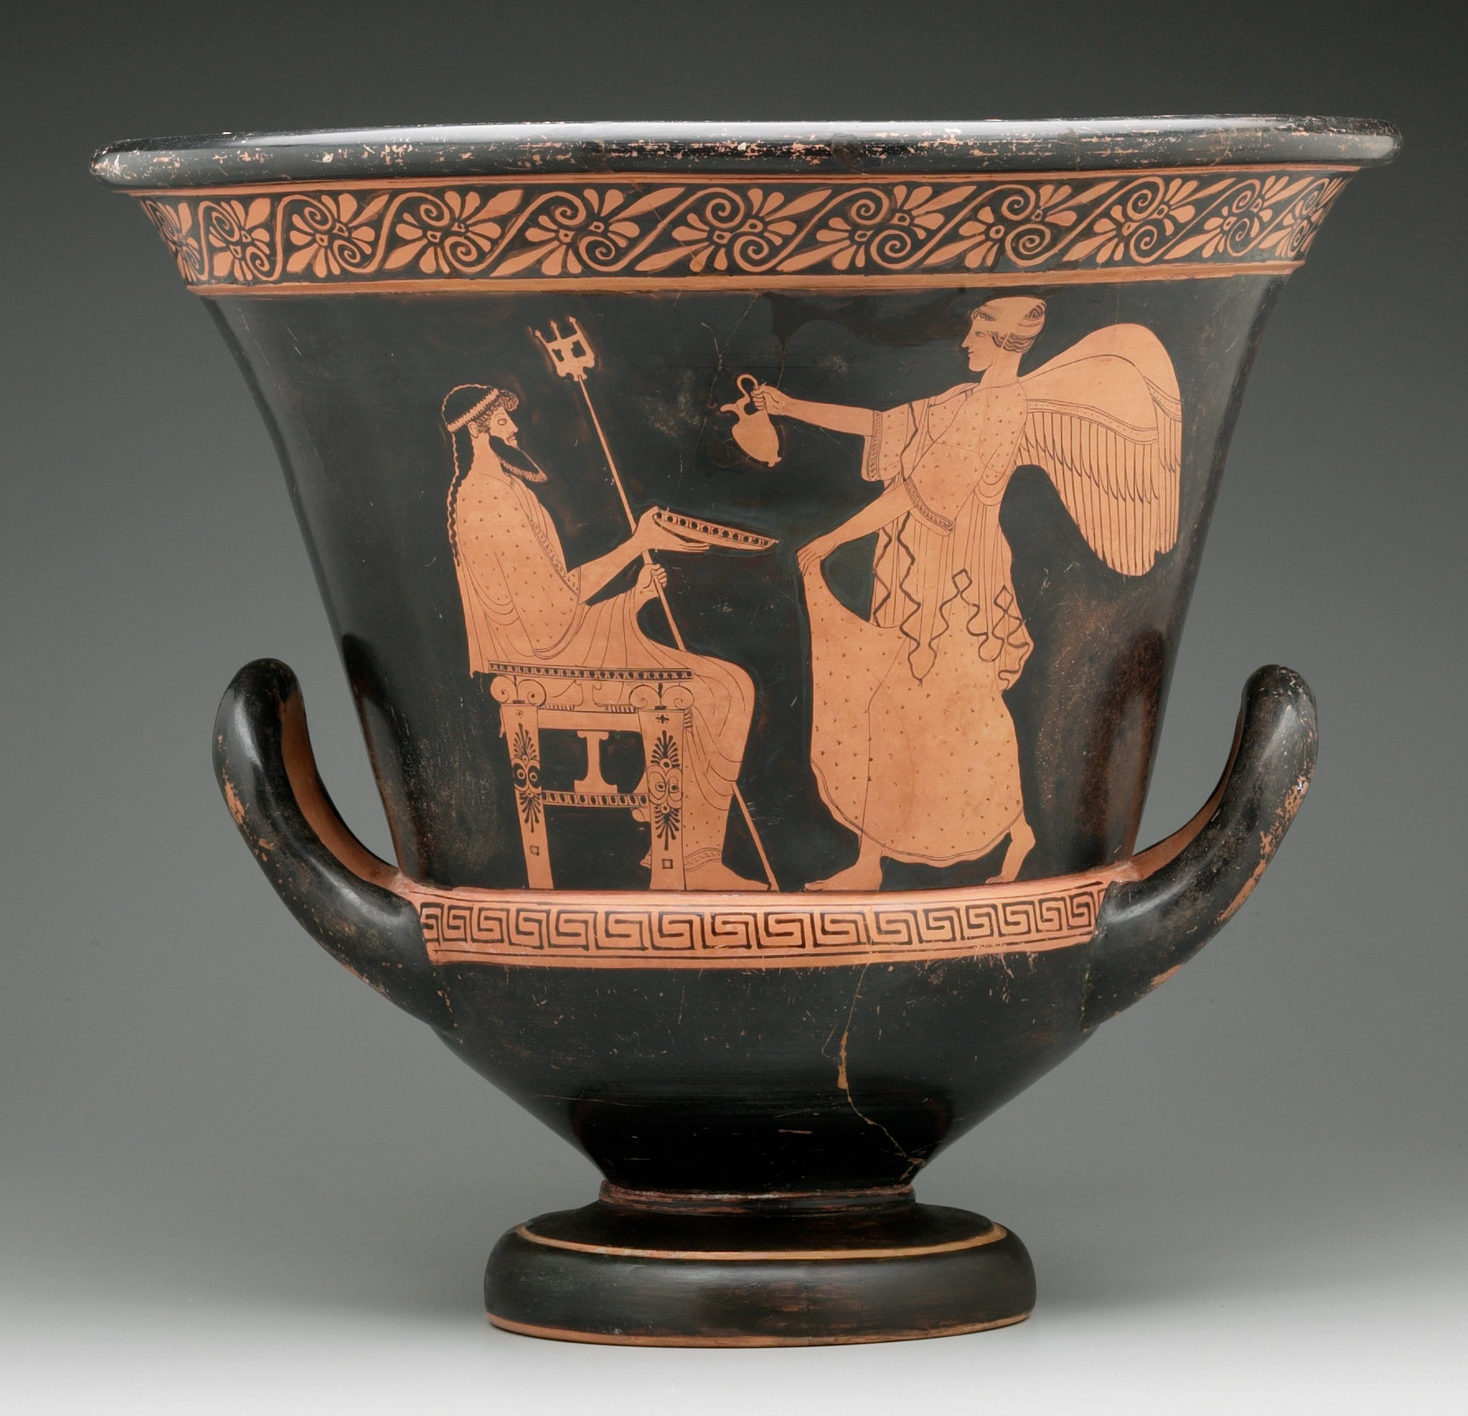 Poseidon seated holding a trident and bowl. The winged goddess Nike waits on him.